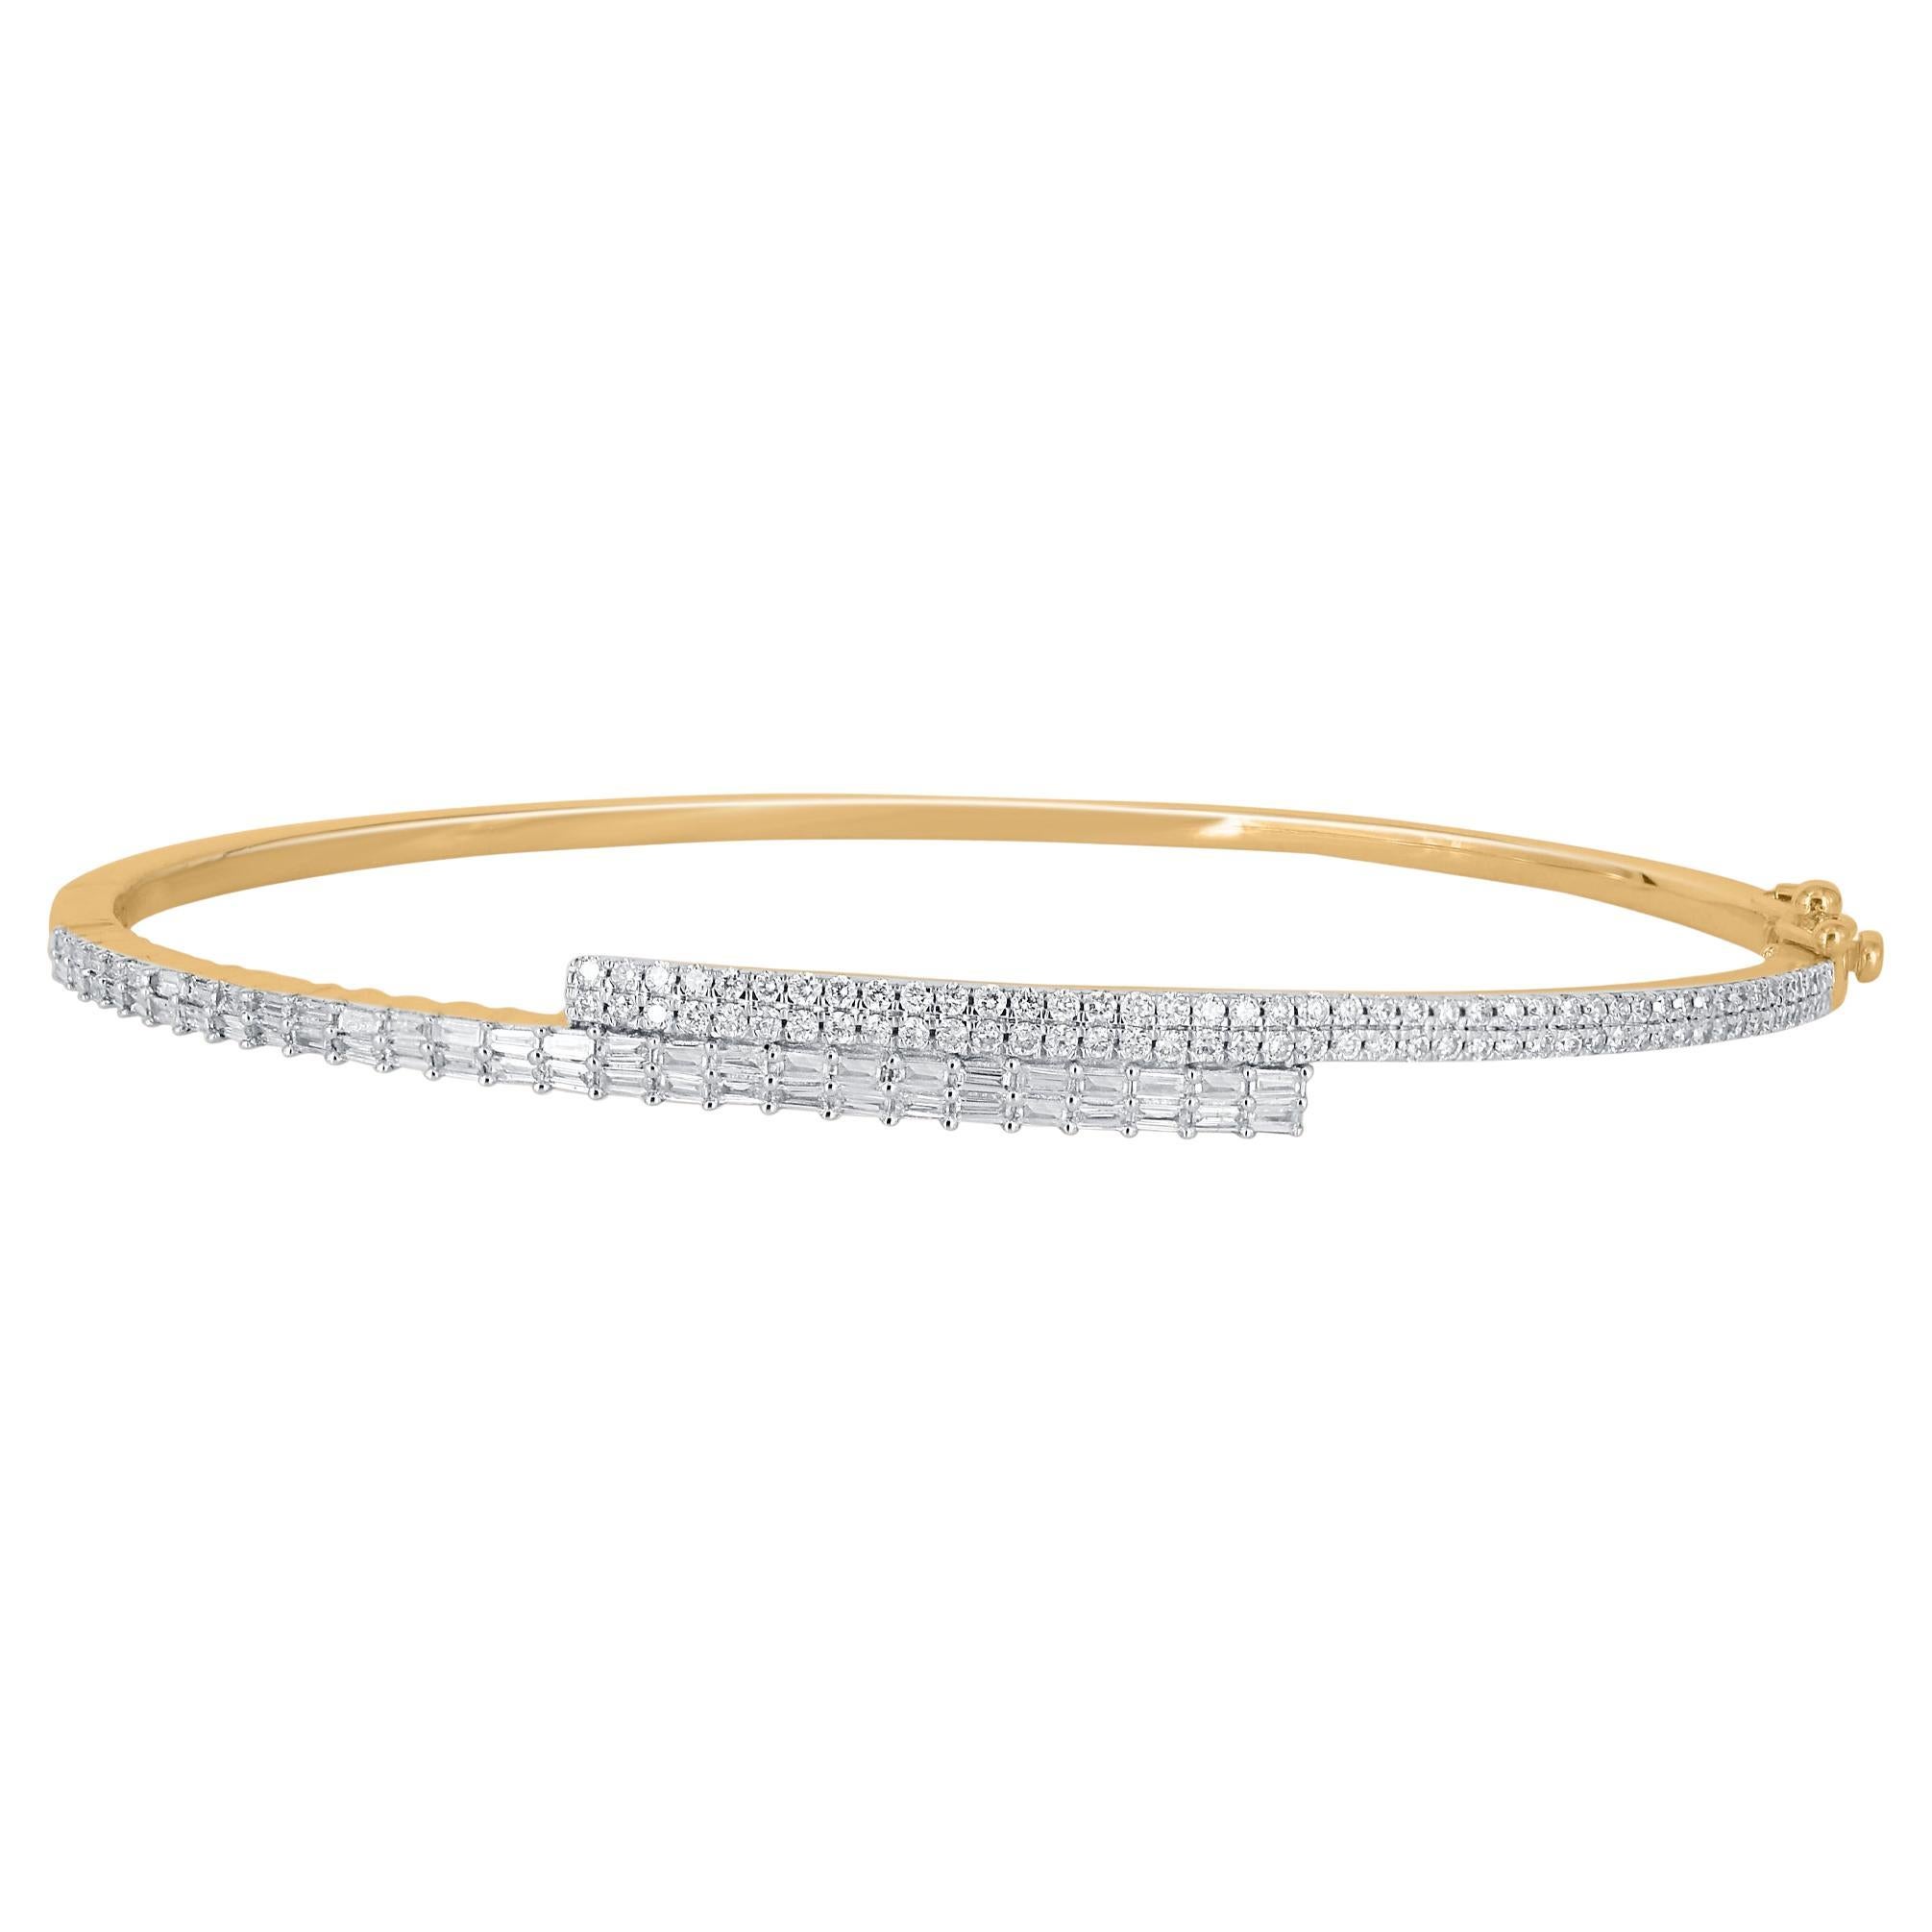 TJD 1 Carat Natural Round & Baguette Diamond Bangle Bracelet in 18KT Yellow Gold For Sale